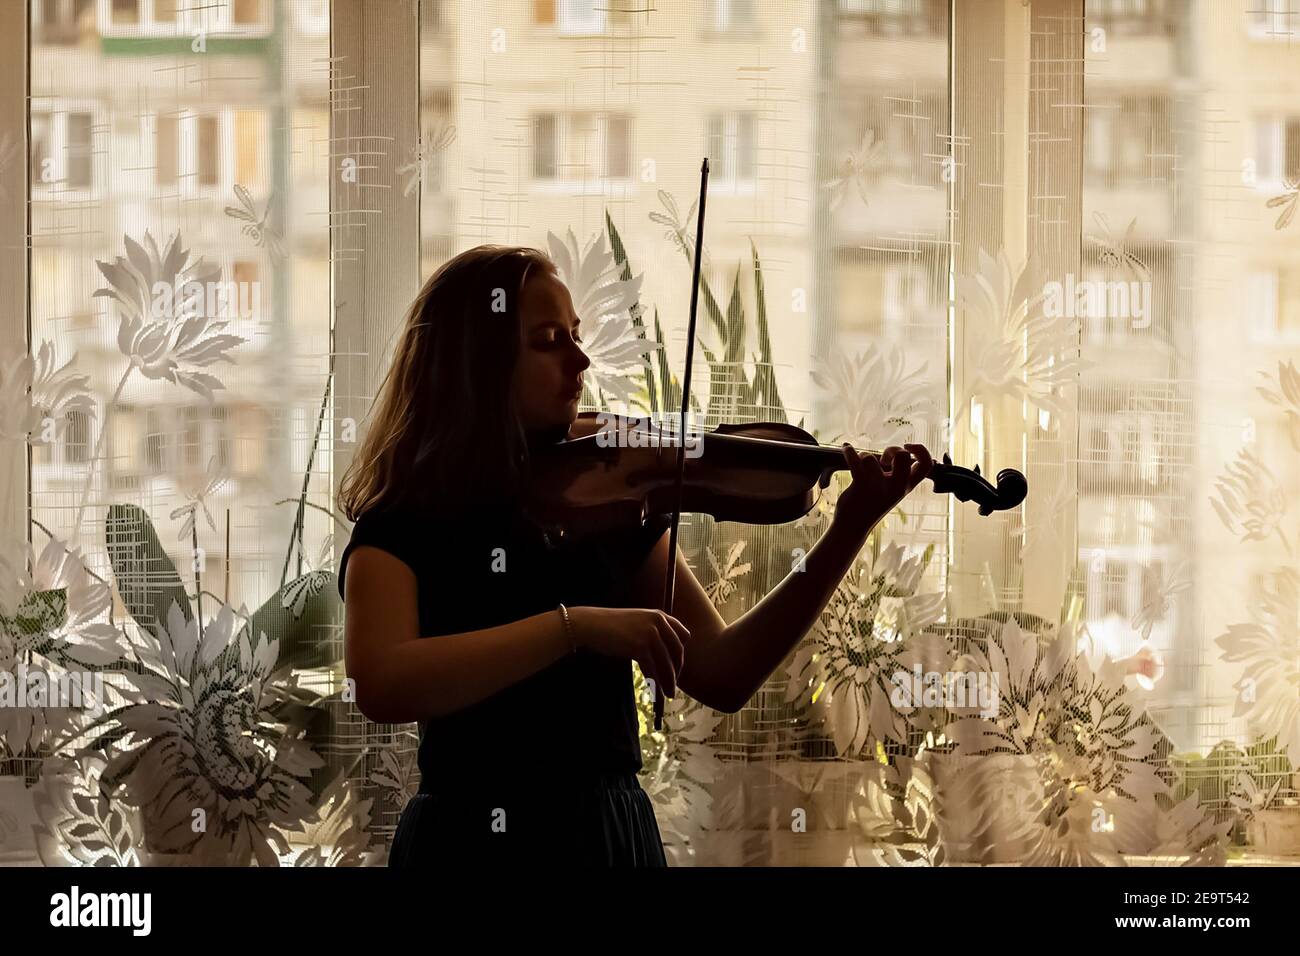 Silhouette of a young girl, a musician. Playing the violin in the background of the window. Stock Photo